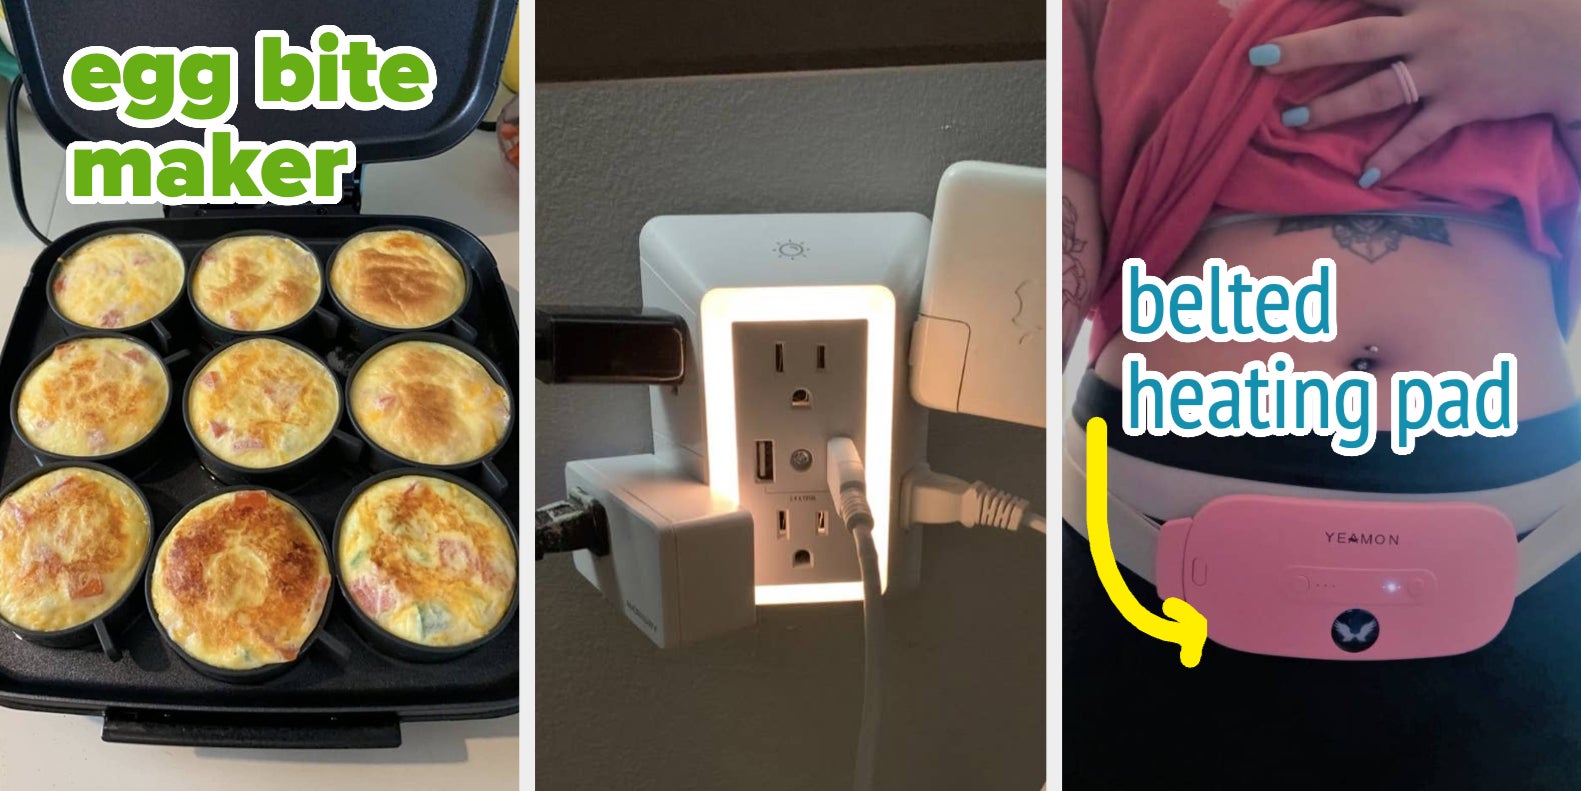 25 Just Plain Clever Gadgets & Gizmos That Have Made My Life Infinitely  Easier